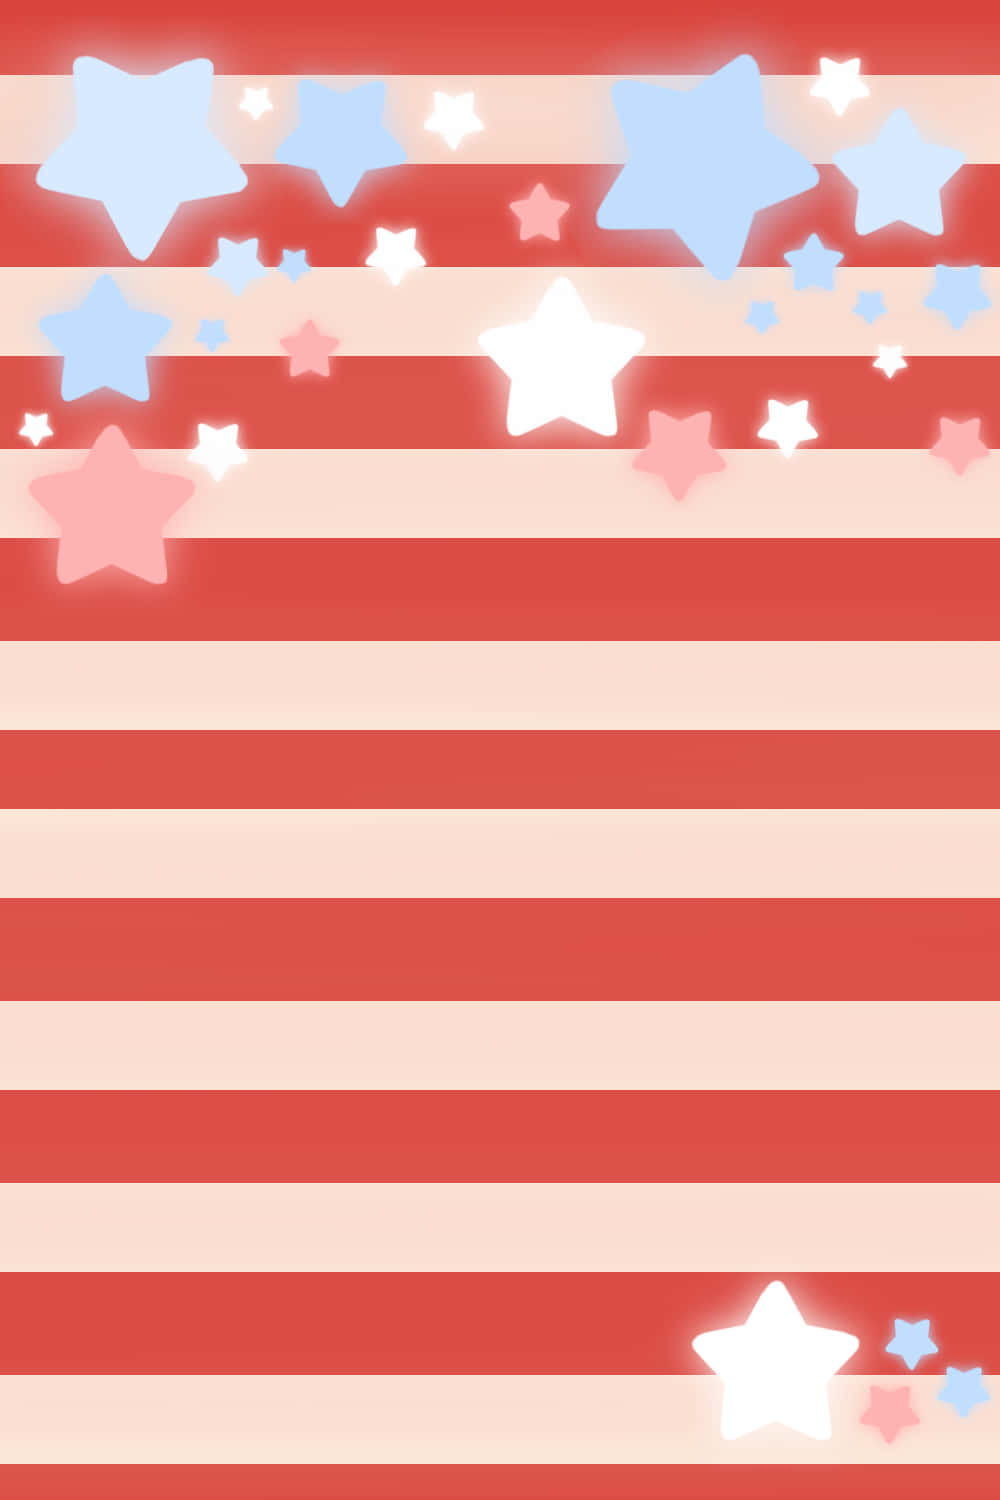 Celebrate 4th of July with this cute illustration!